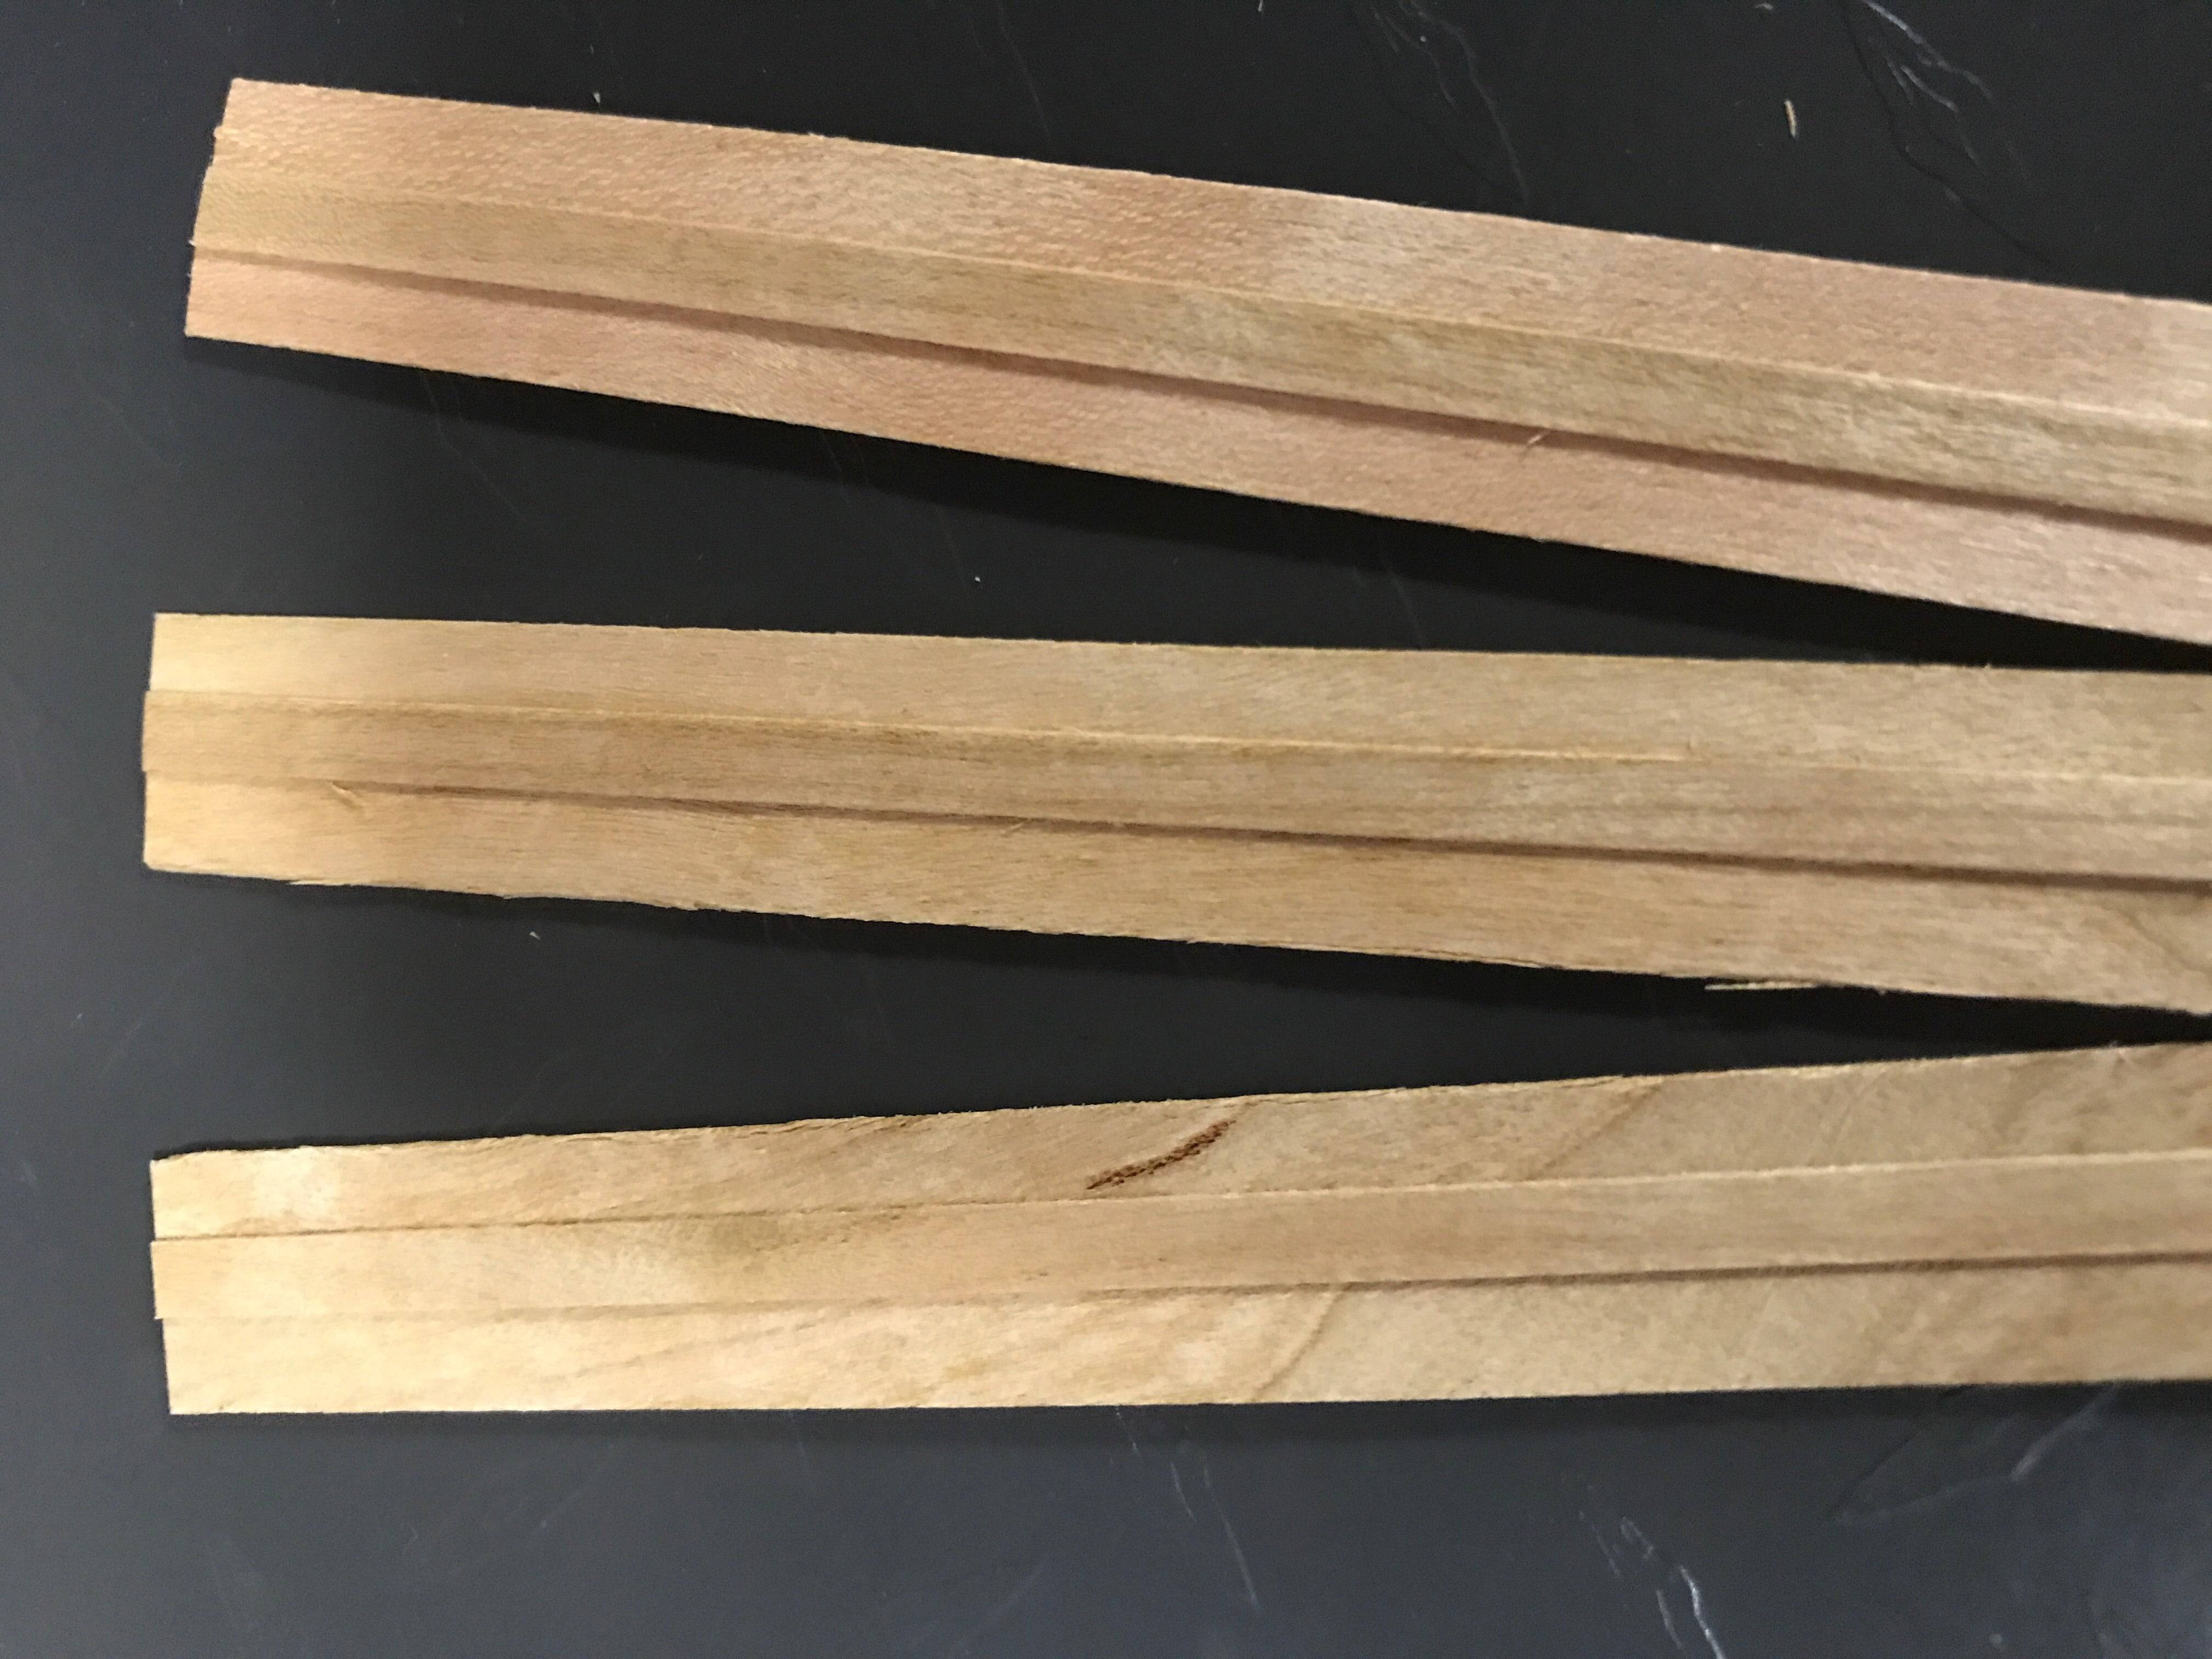 Wooden Wicks for Candles | Northwood Candle Supply Medium / 100